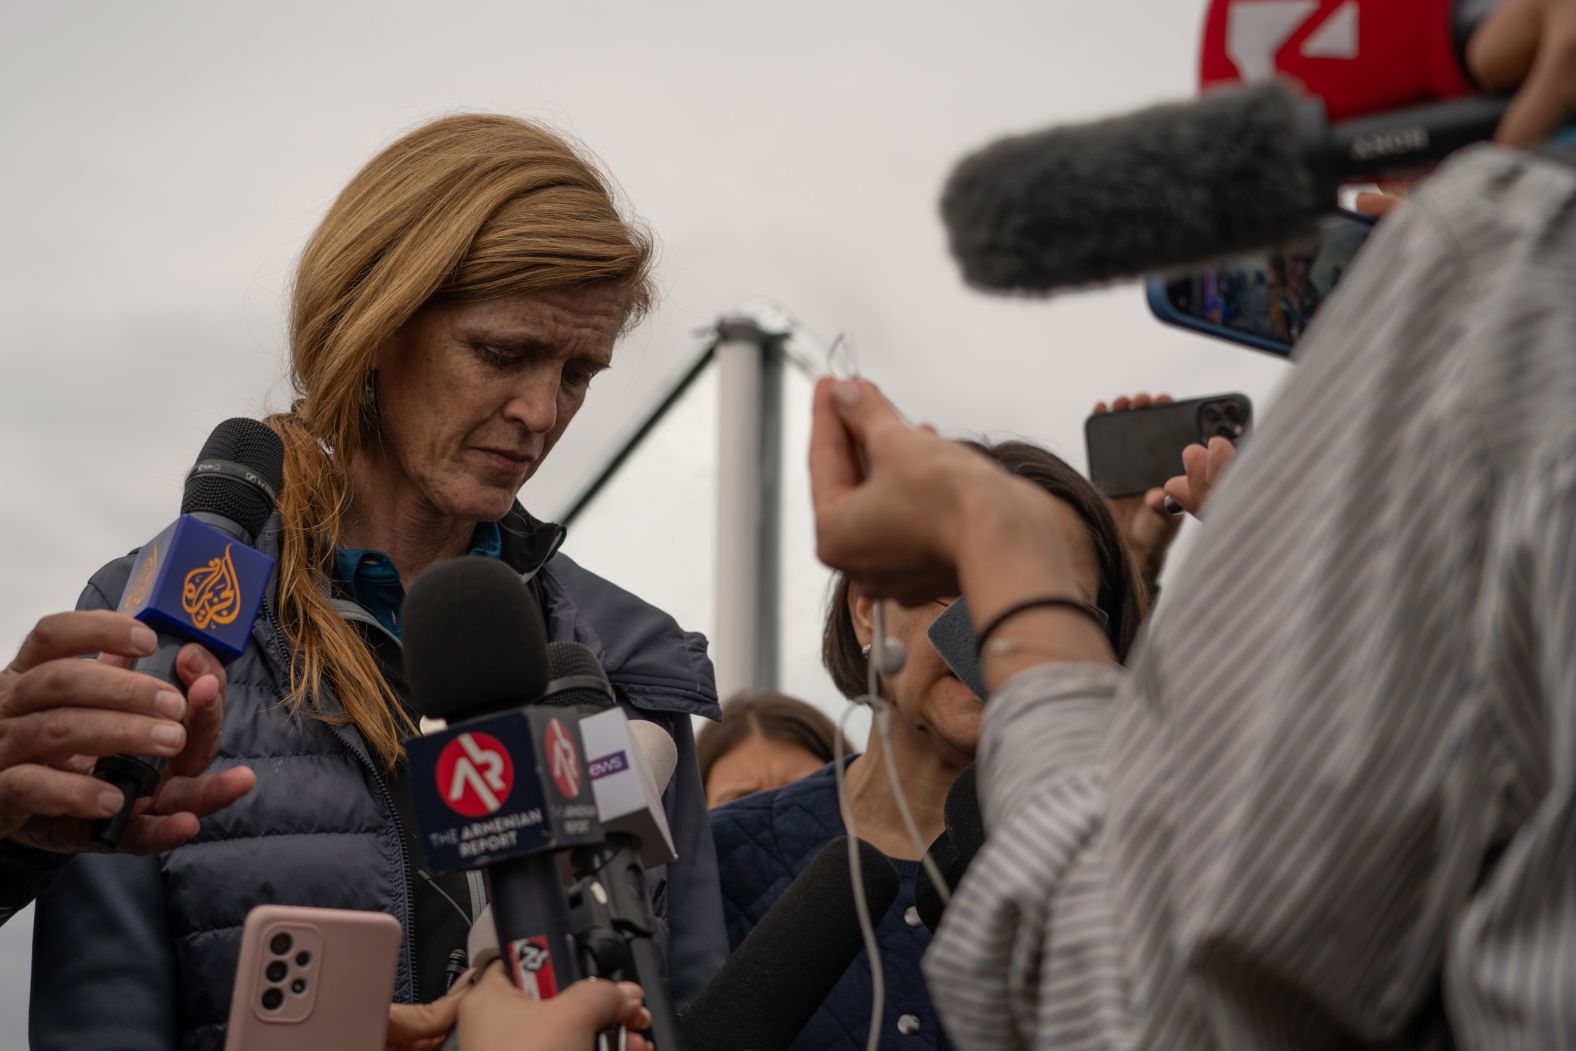 Samantha Power, the administrator of the US Agency for International Development, speaks to the press after visiting the humanitarian hub in Kornidzor on September 26. Power said many of those who had arrived <a href="https://www.cnn.com/2023/09/26/europe/us-envoy-support-nagorno-karabakh-intl/index.html" target="_blank">were suffering from "severe malnutrition,"</a> according to doctors at the scene. "It is absolutely critical that independent monitors as well as humanitarian organizations get access to the people in Nagorno-Karabakh who still have dire needs," she said.